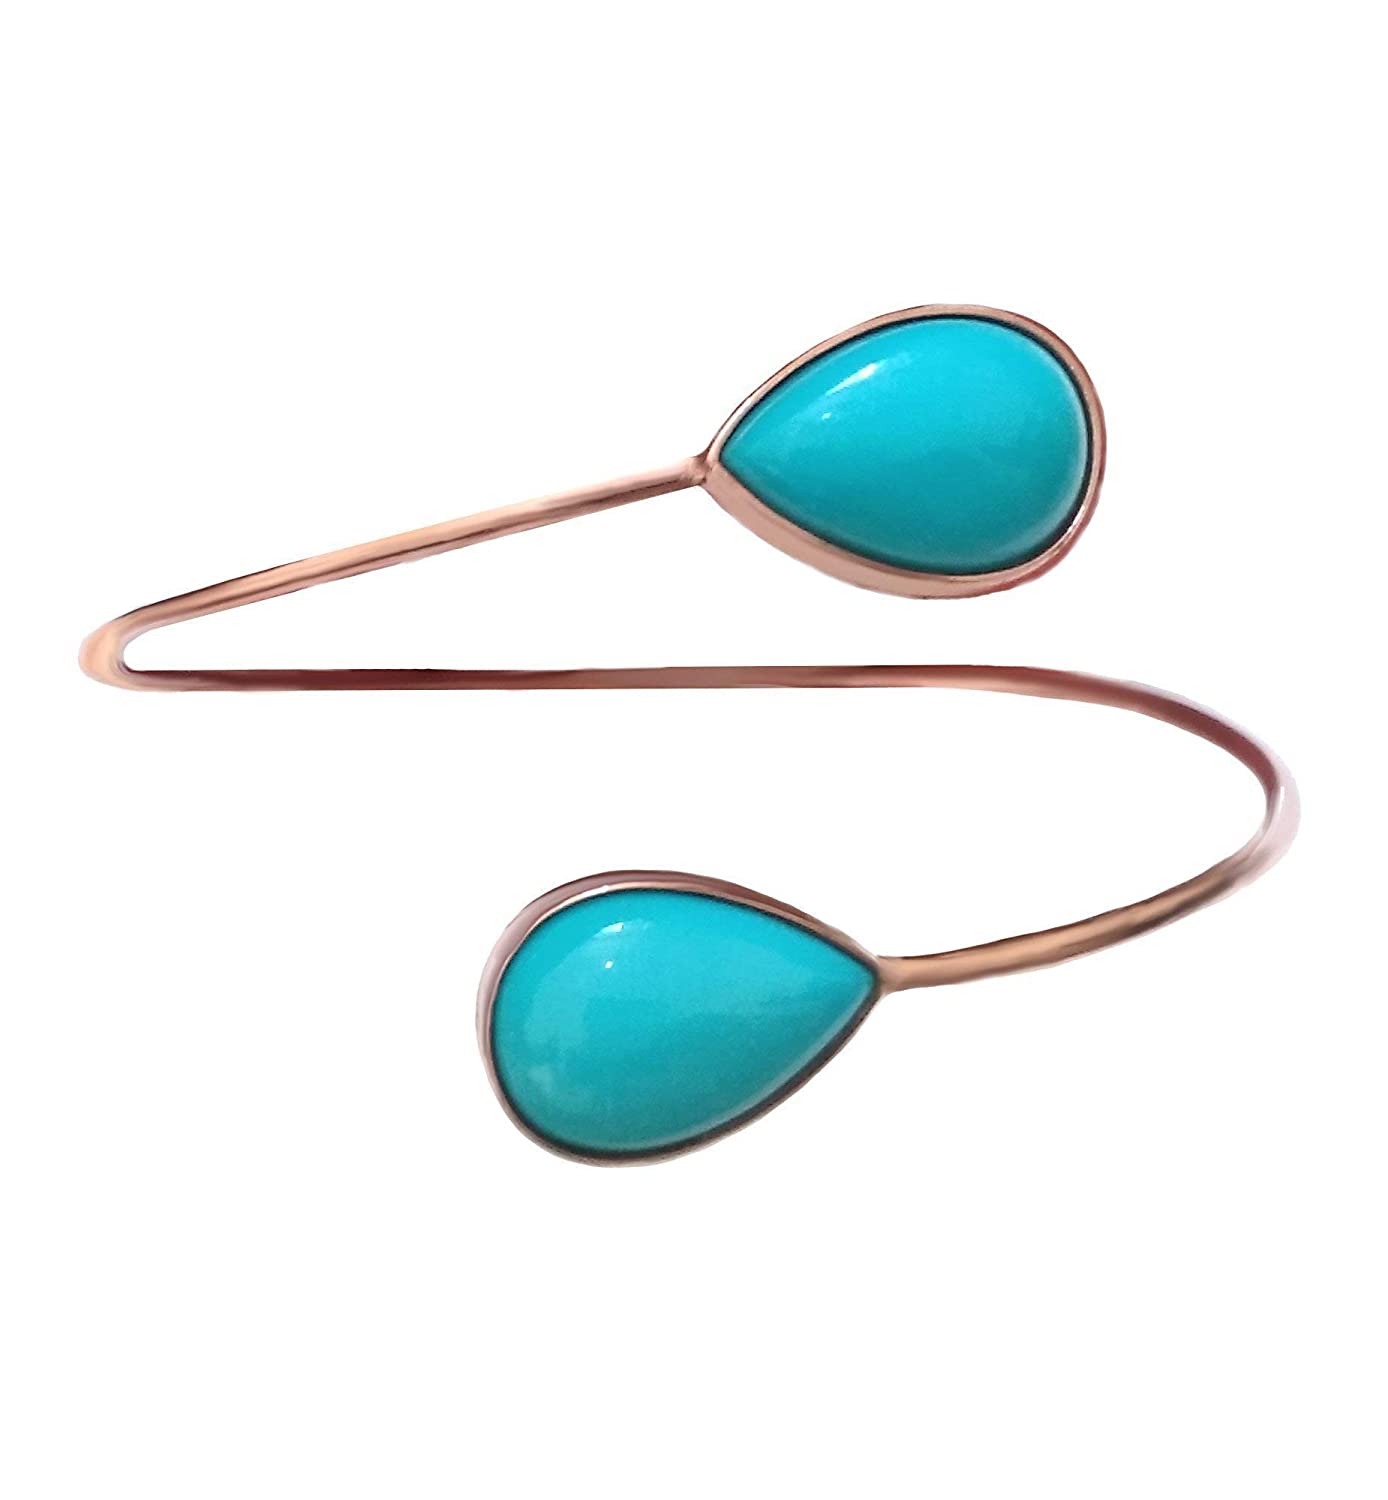 Rose gold turquoise bangles